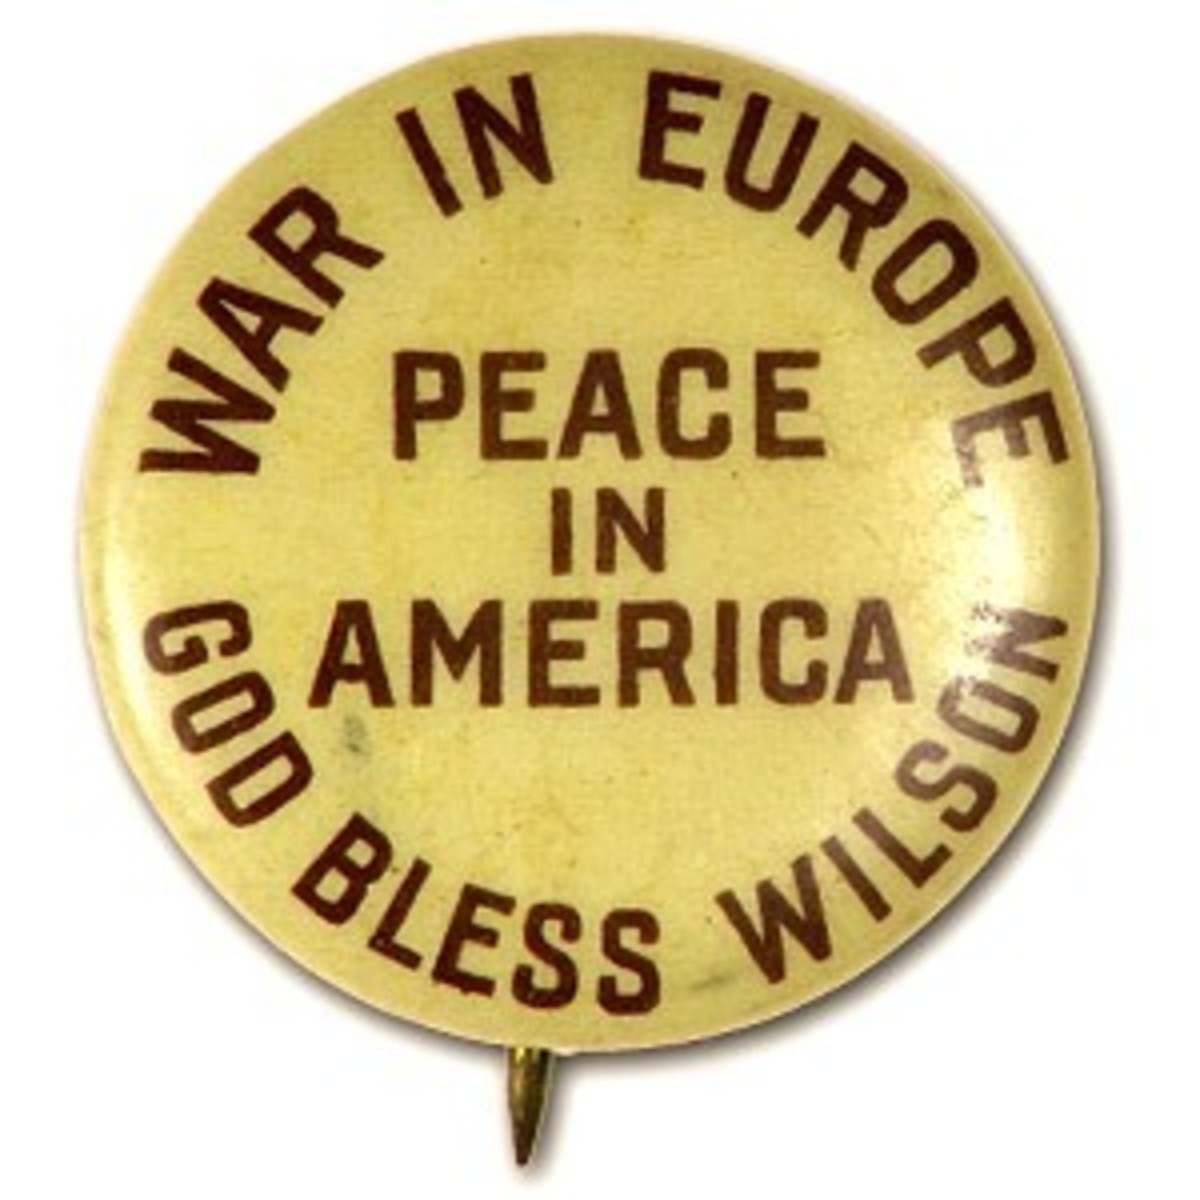 Campaign button from the 1916 presidential campaign of Woodrow Wilson.